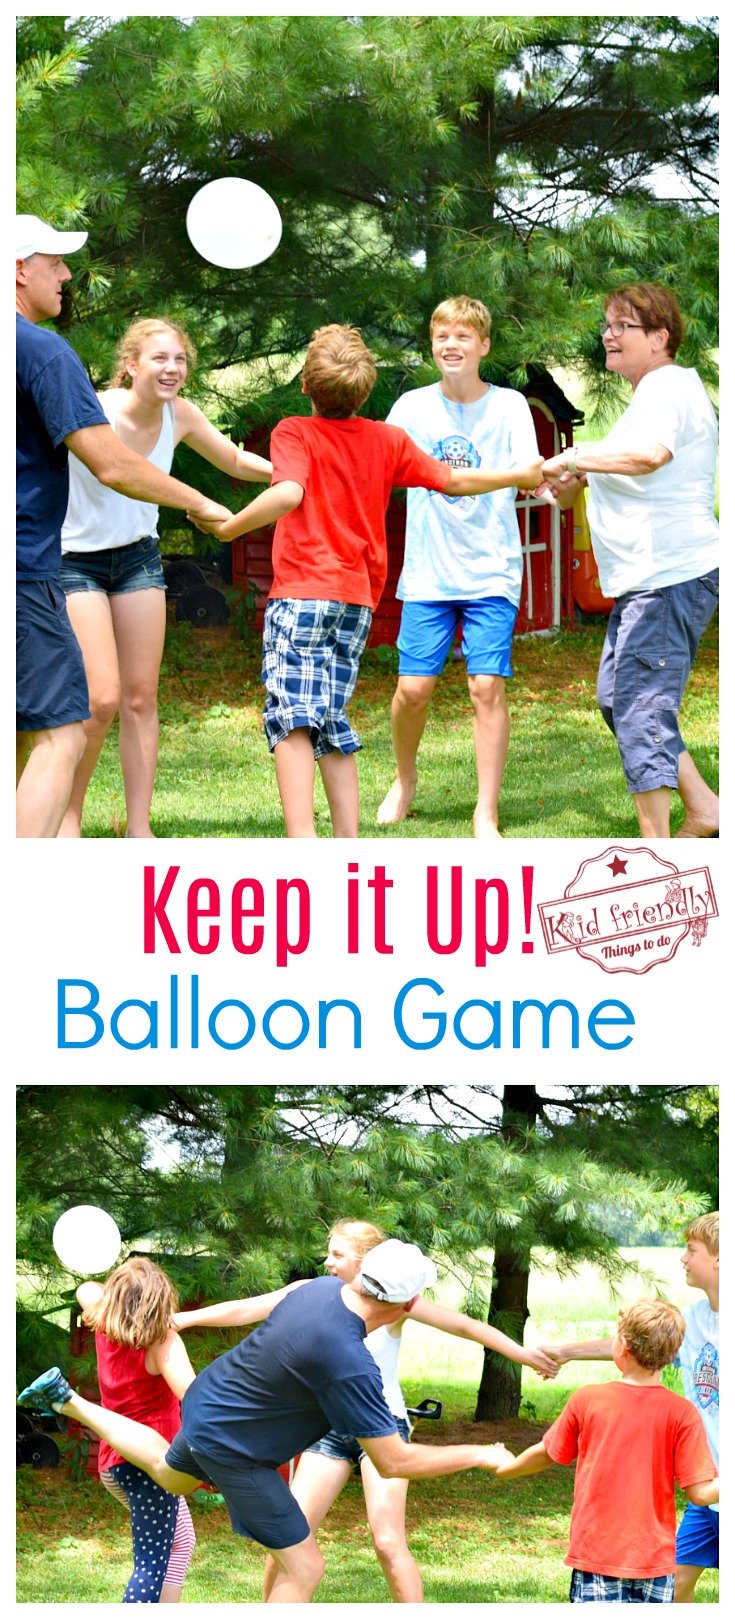 Just Keep it Up - A Fun Balloon Game for Kids, Teens and Adults to Play - perfect for indoor or outdoor. Great party game - www.kidfriendlythingstodo.com